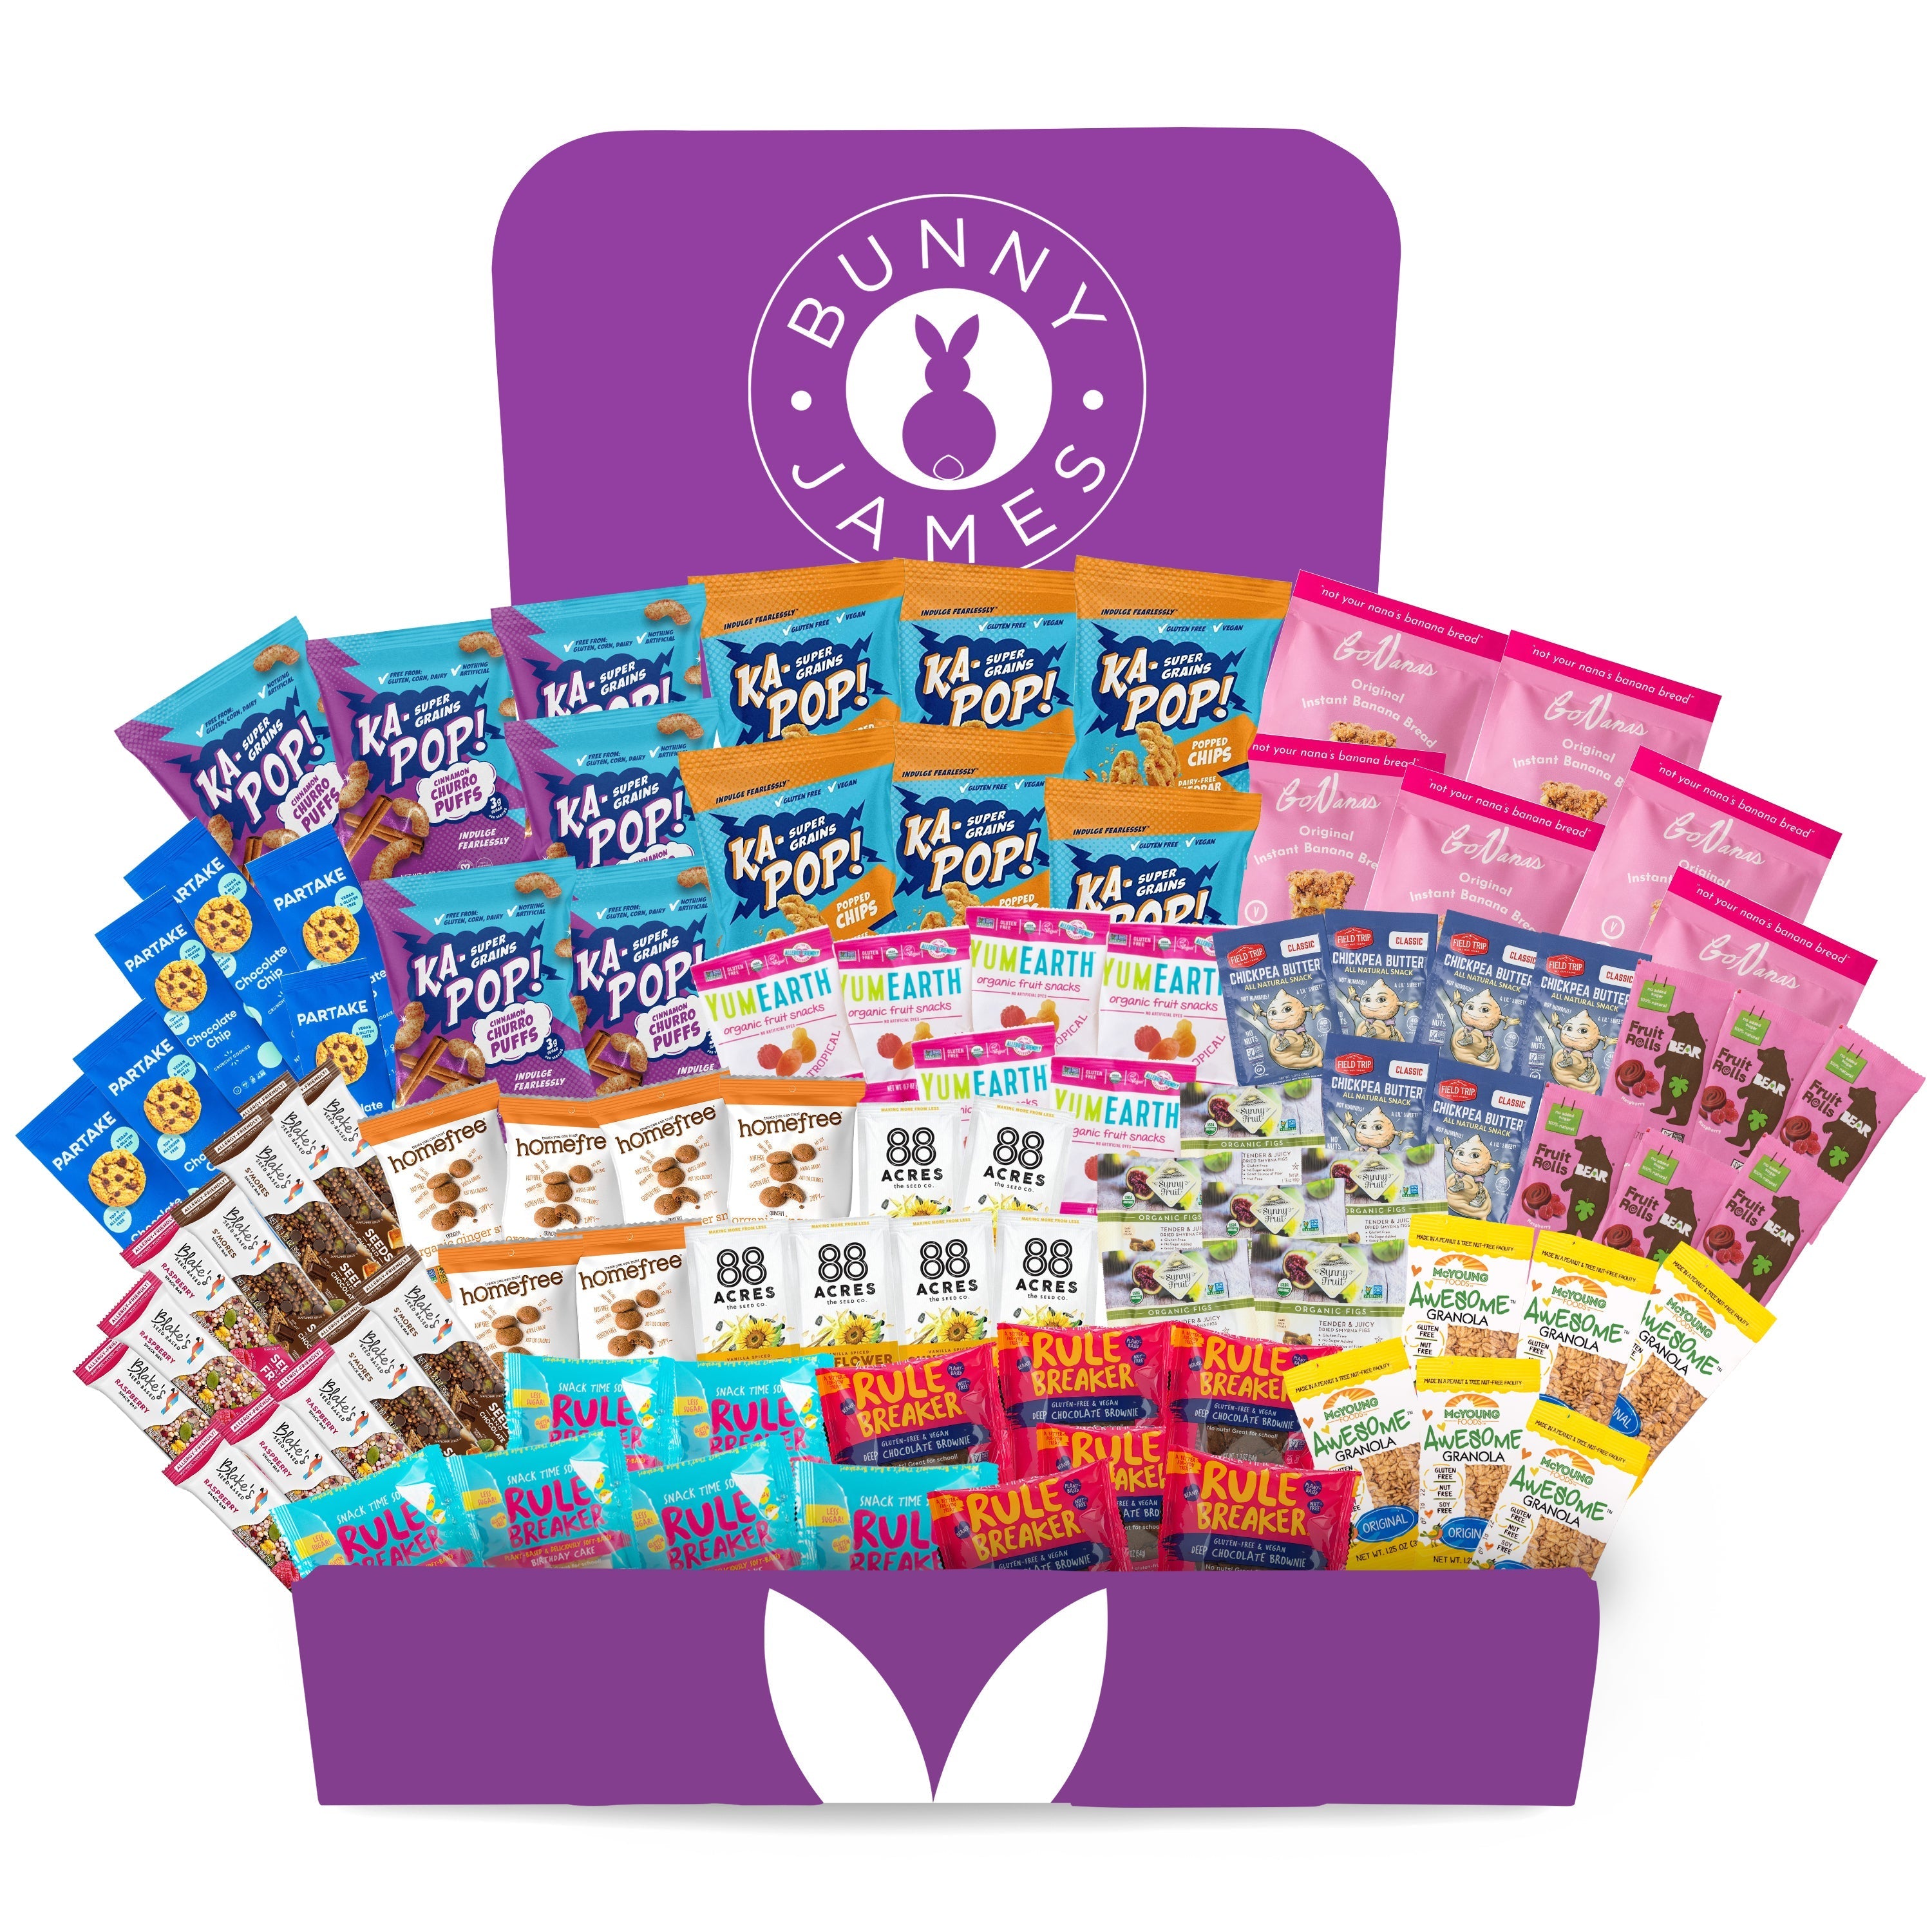 https://bunnyjamesboxes.com/cdn/shop/products/bunny-james-boxes-snack-boxes-top-8-allergen-90-count-variety-bulk-snack-office-box-41320751989042.jpg?v=1681828430